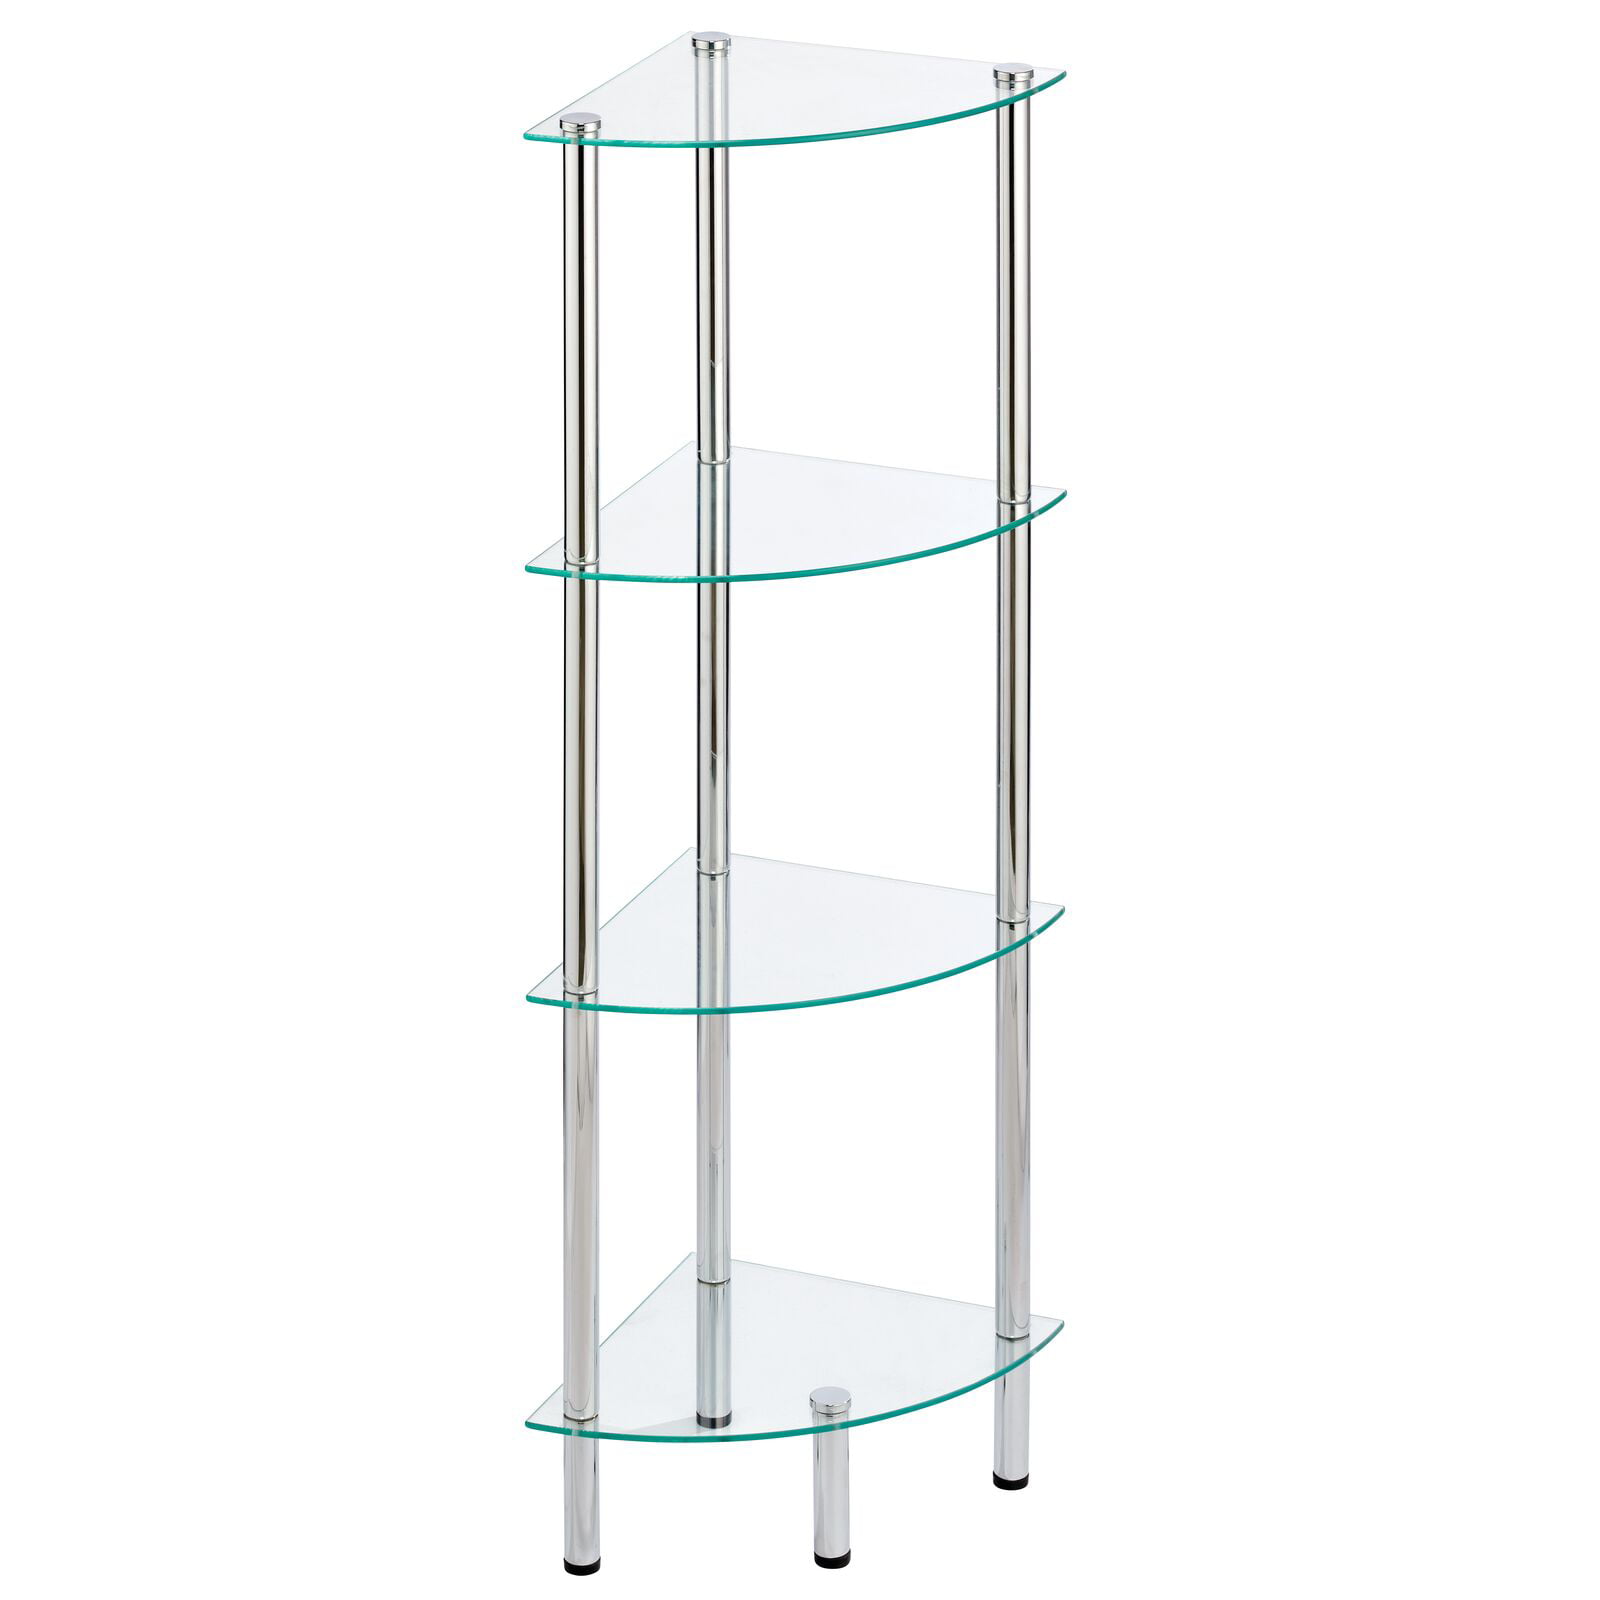 Acrylic Corner Safety Shelf & Fixings for Home Bathroom Bedrooms Retail Display 